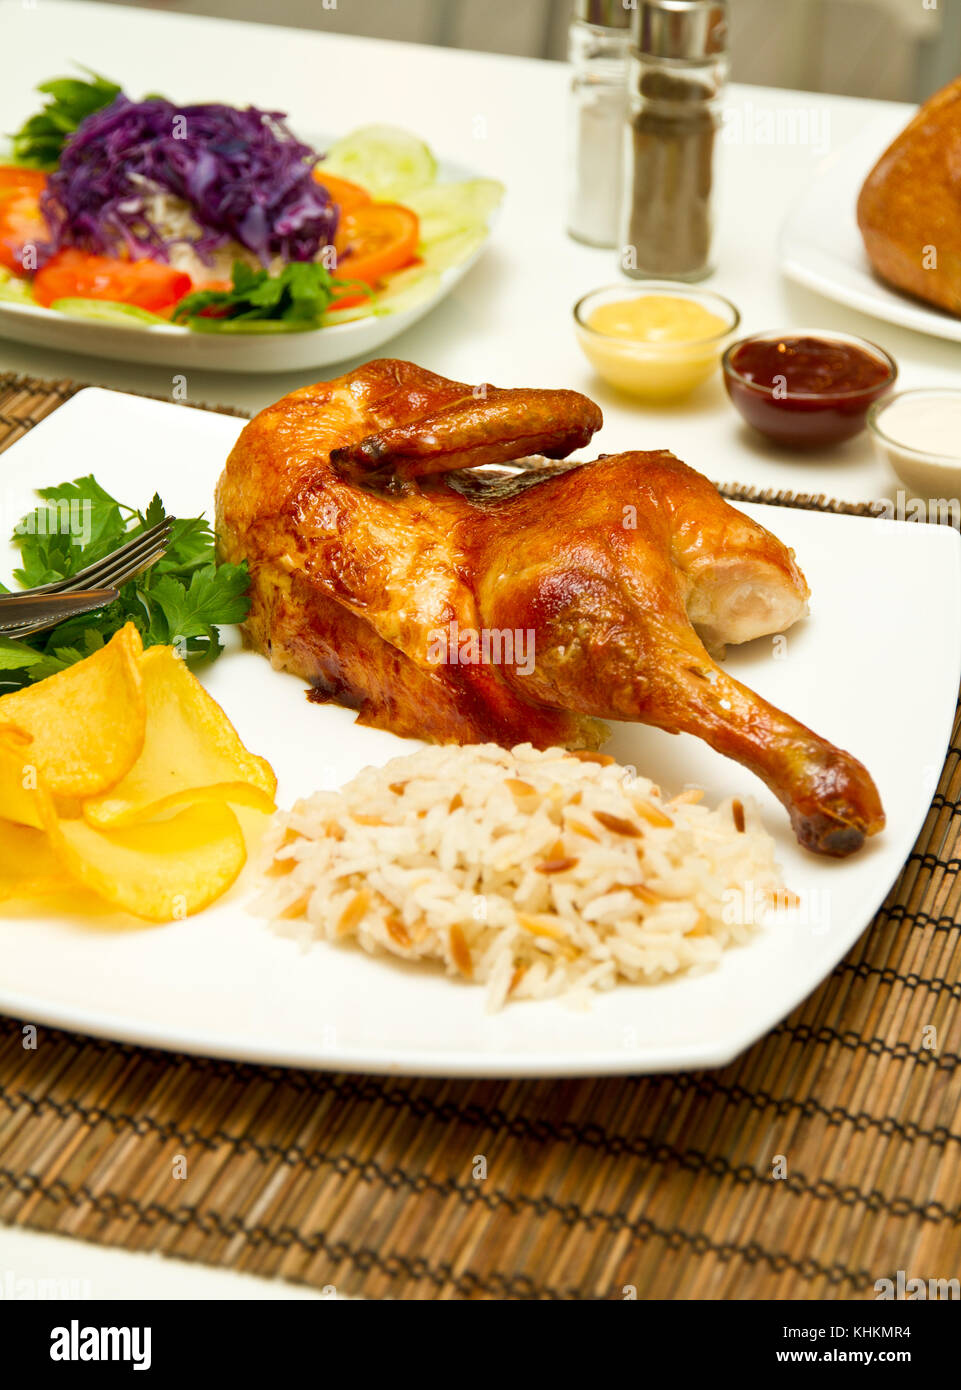 Charcoal baked chicken and side dishes Stock Photo